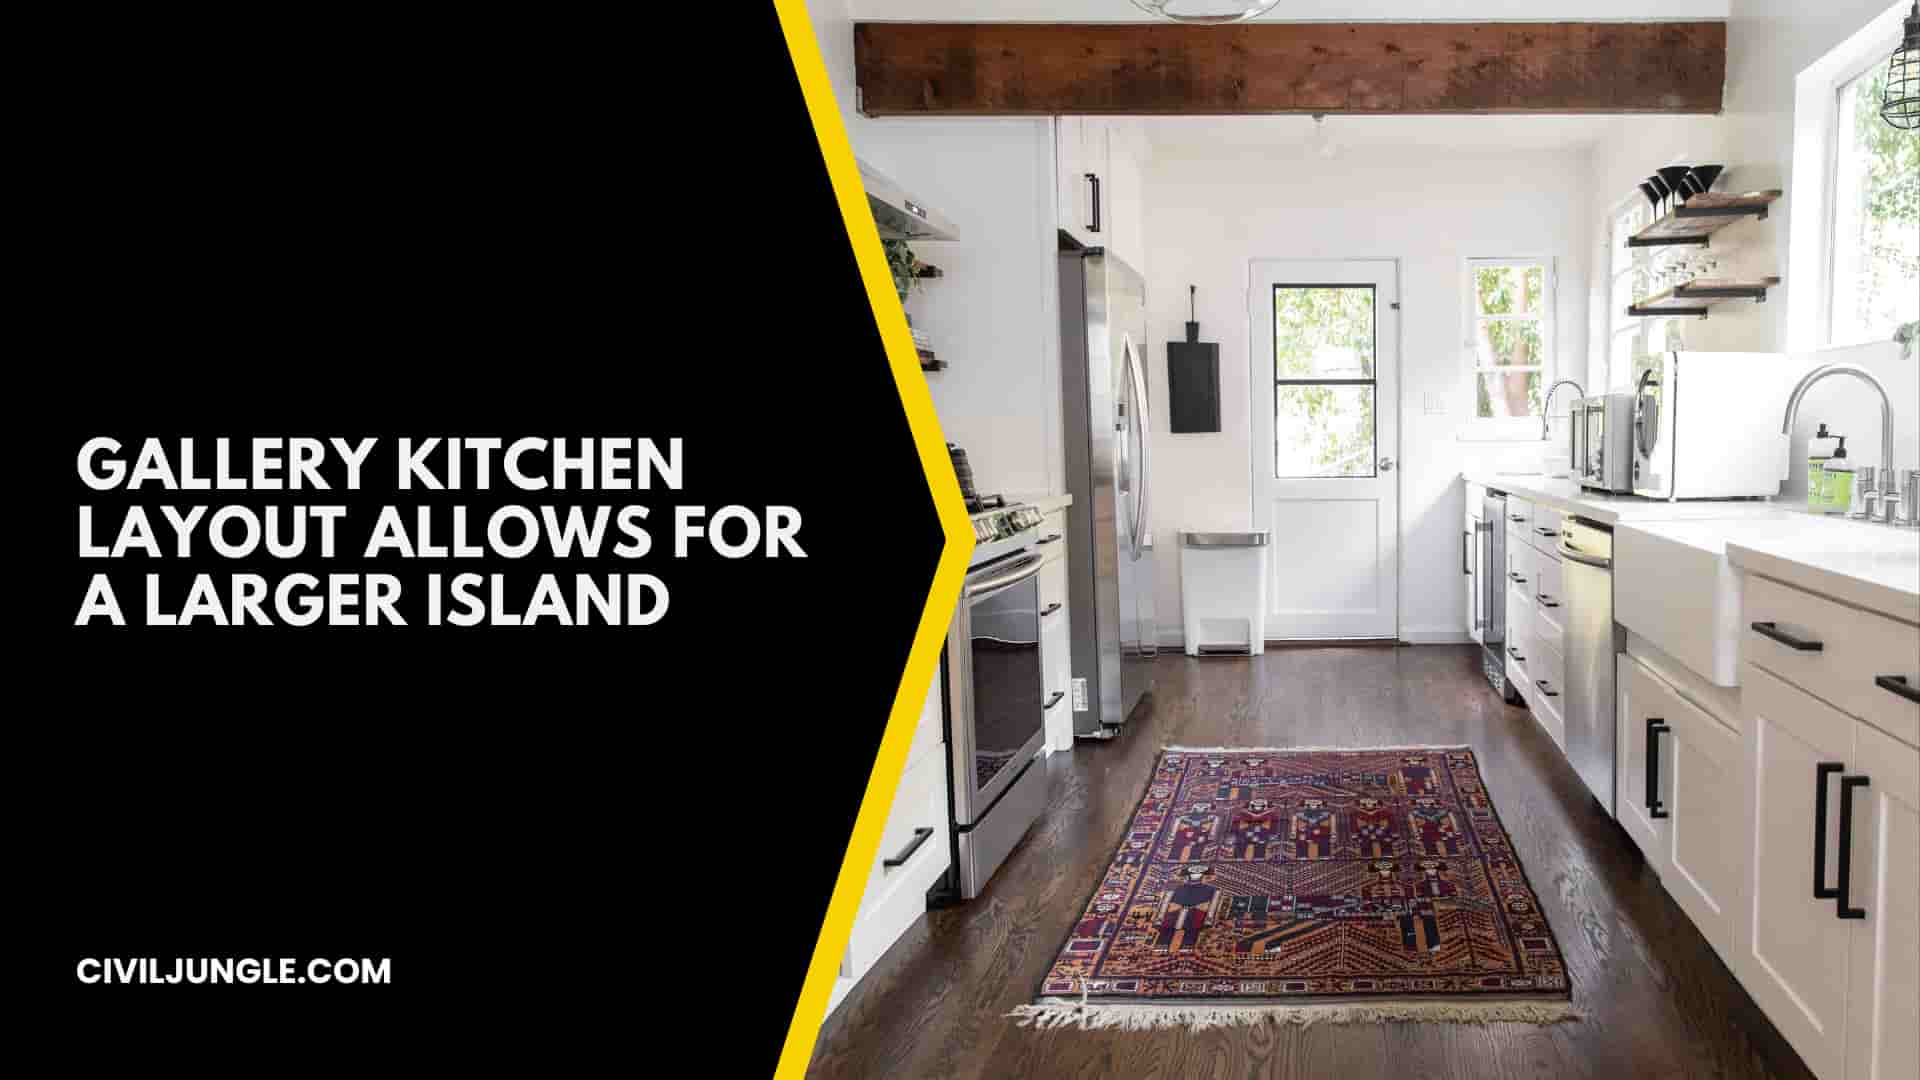 Gallery Kitchen Layout Allows for a Larger Island